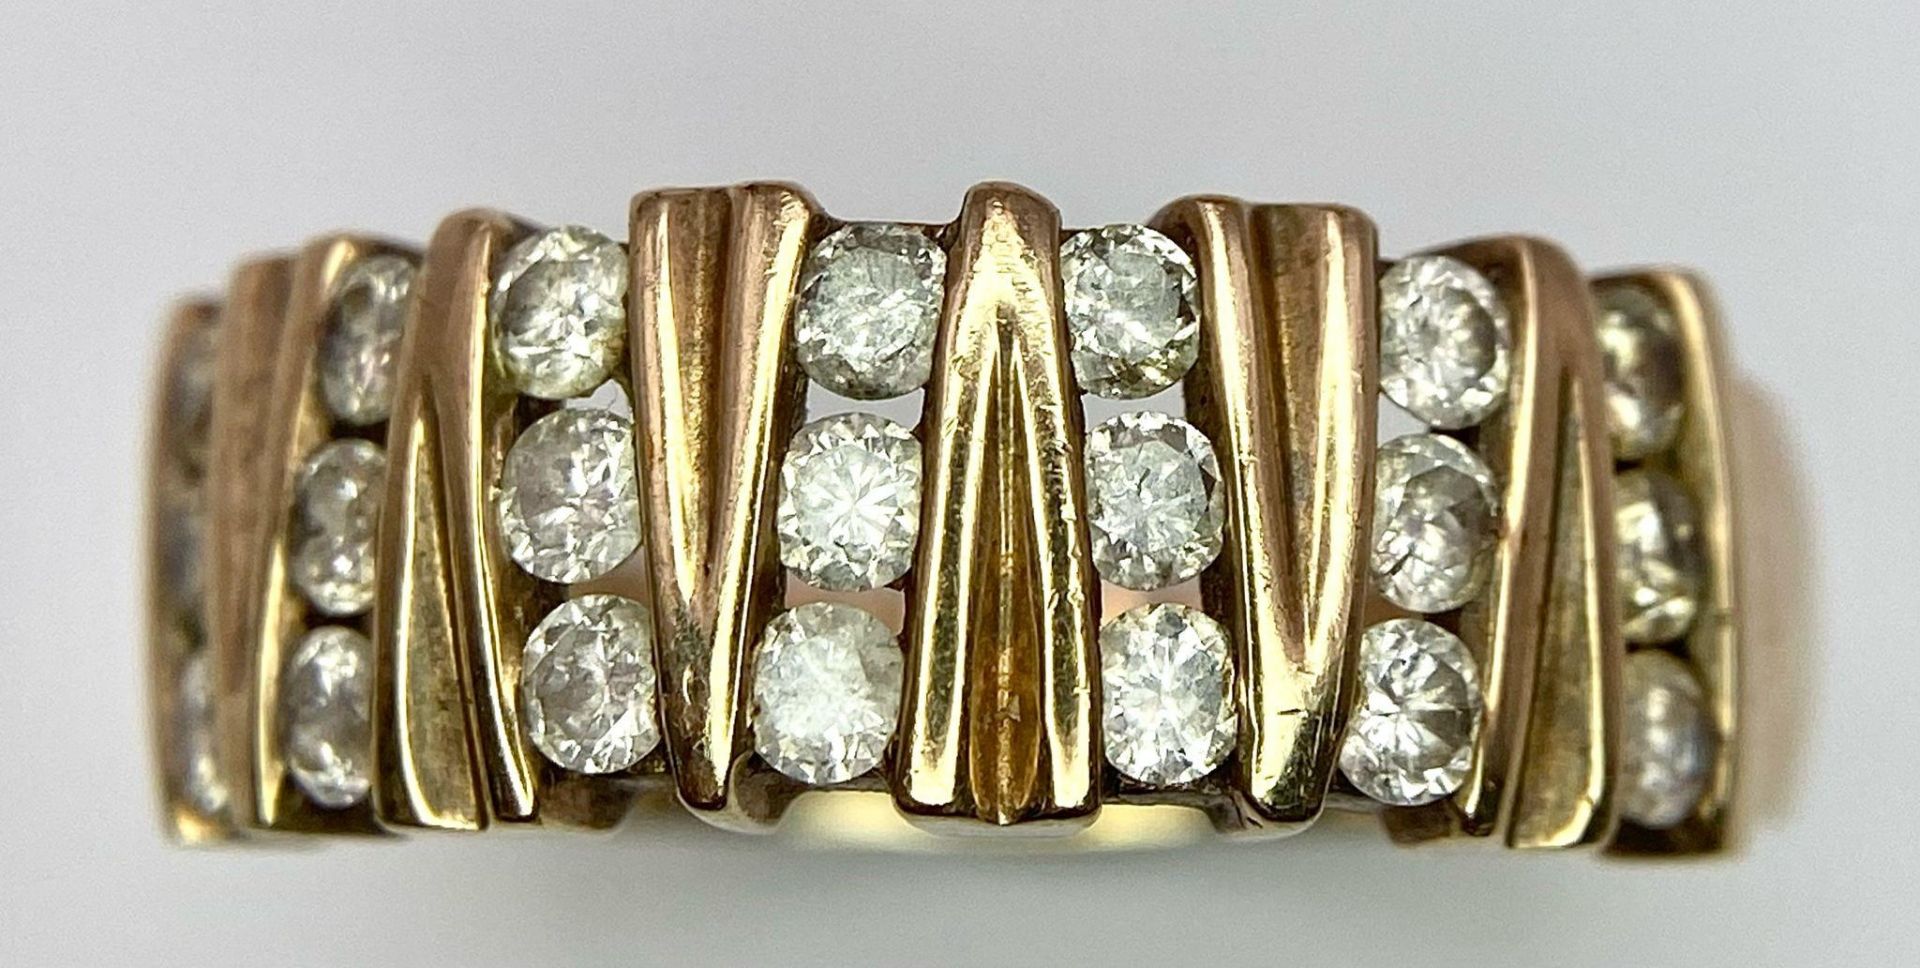 A Vintage 9K Yellow Gold 21 Diamond Ring. 1ctw of brilliant round cut diamonds. Size T. 5.9g total - Image 2 of 7